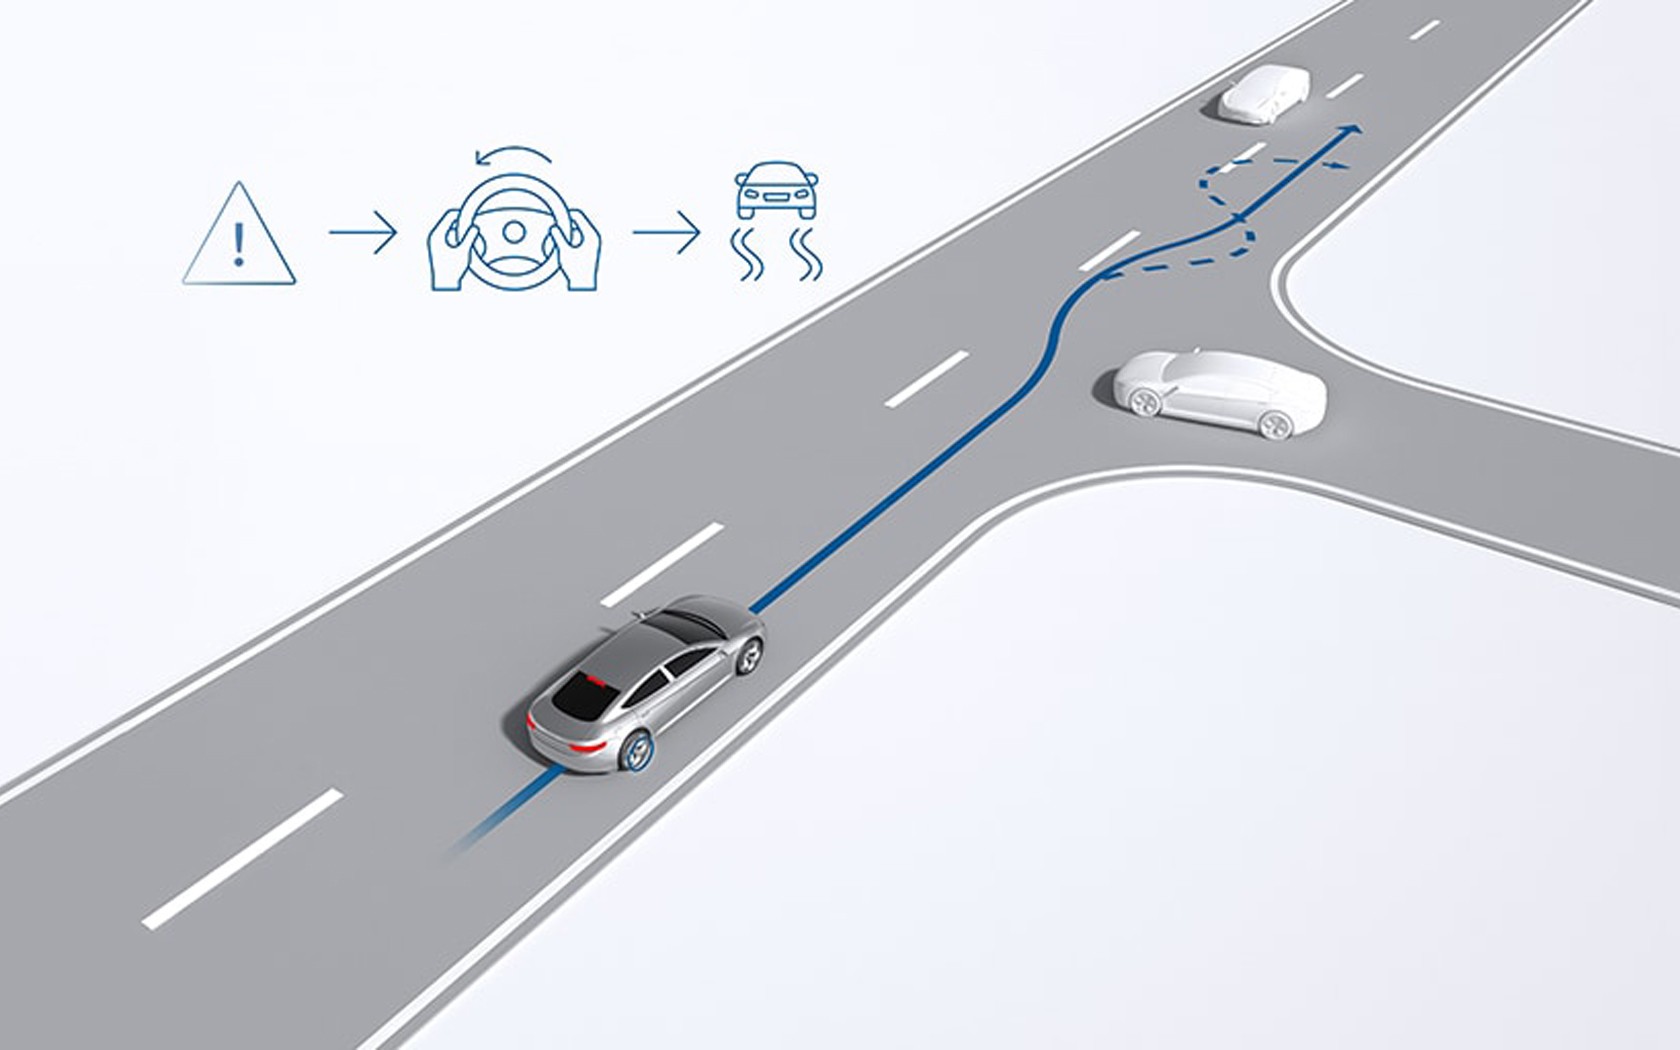 https://s1.cdn.autoevolution.com/images/news/gallery/what-electronic-stability-control-and-how-it-works_2.jpg